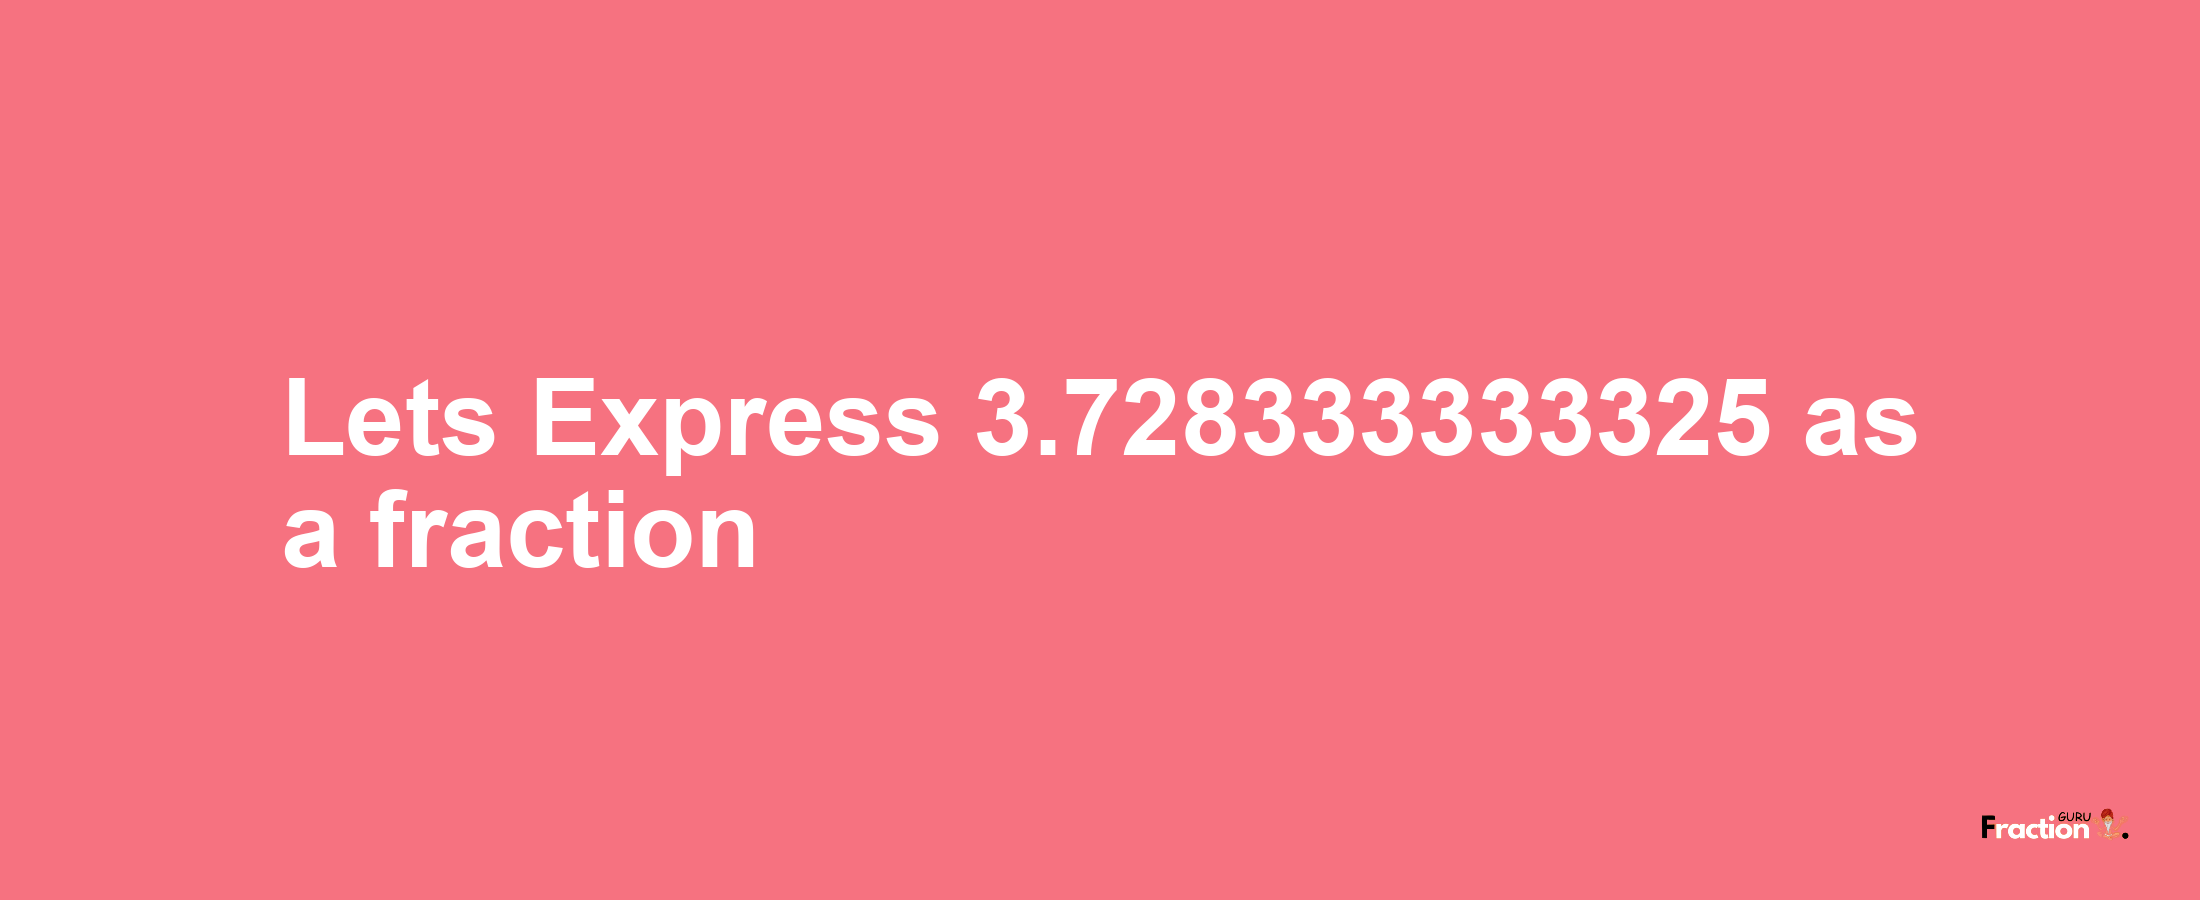 Lets Express 3.728333333325 as afraction